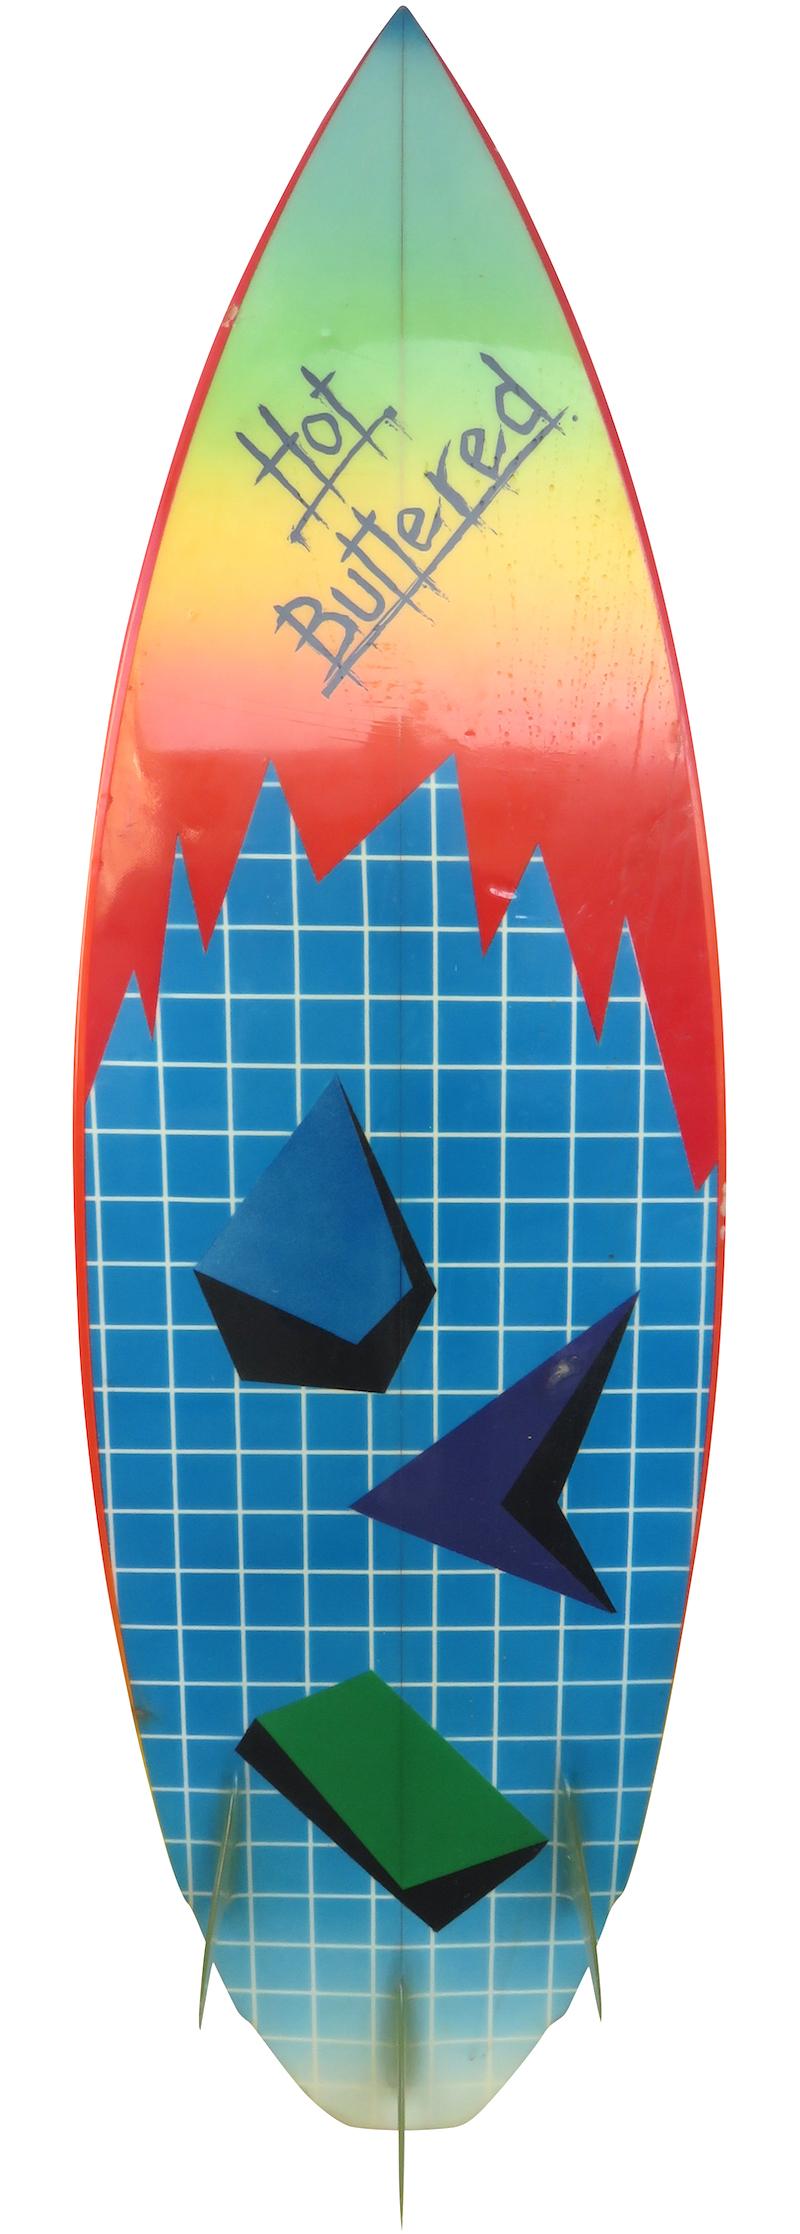 Early 1980s Hot Buttered thruster (tri-fin) shortboard surfboard shaped by Terry Fitzgerald in New Zealand. Features amazing retro airbrush designs on both sides of board with double winged swallow tail shape. A remarkable example of a colorful